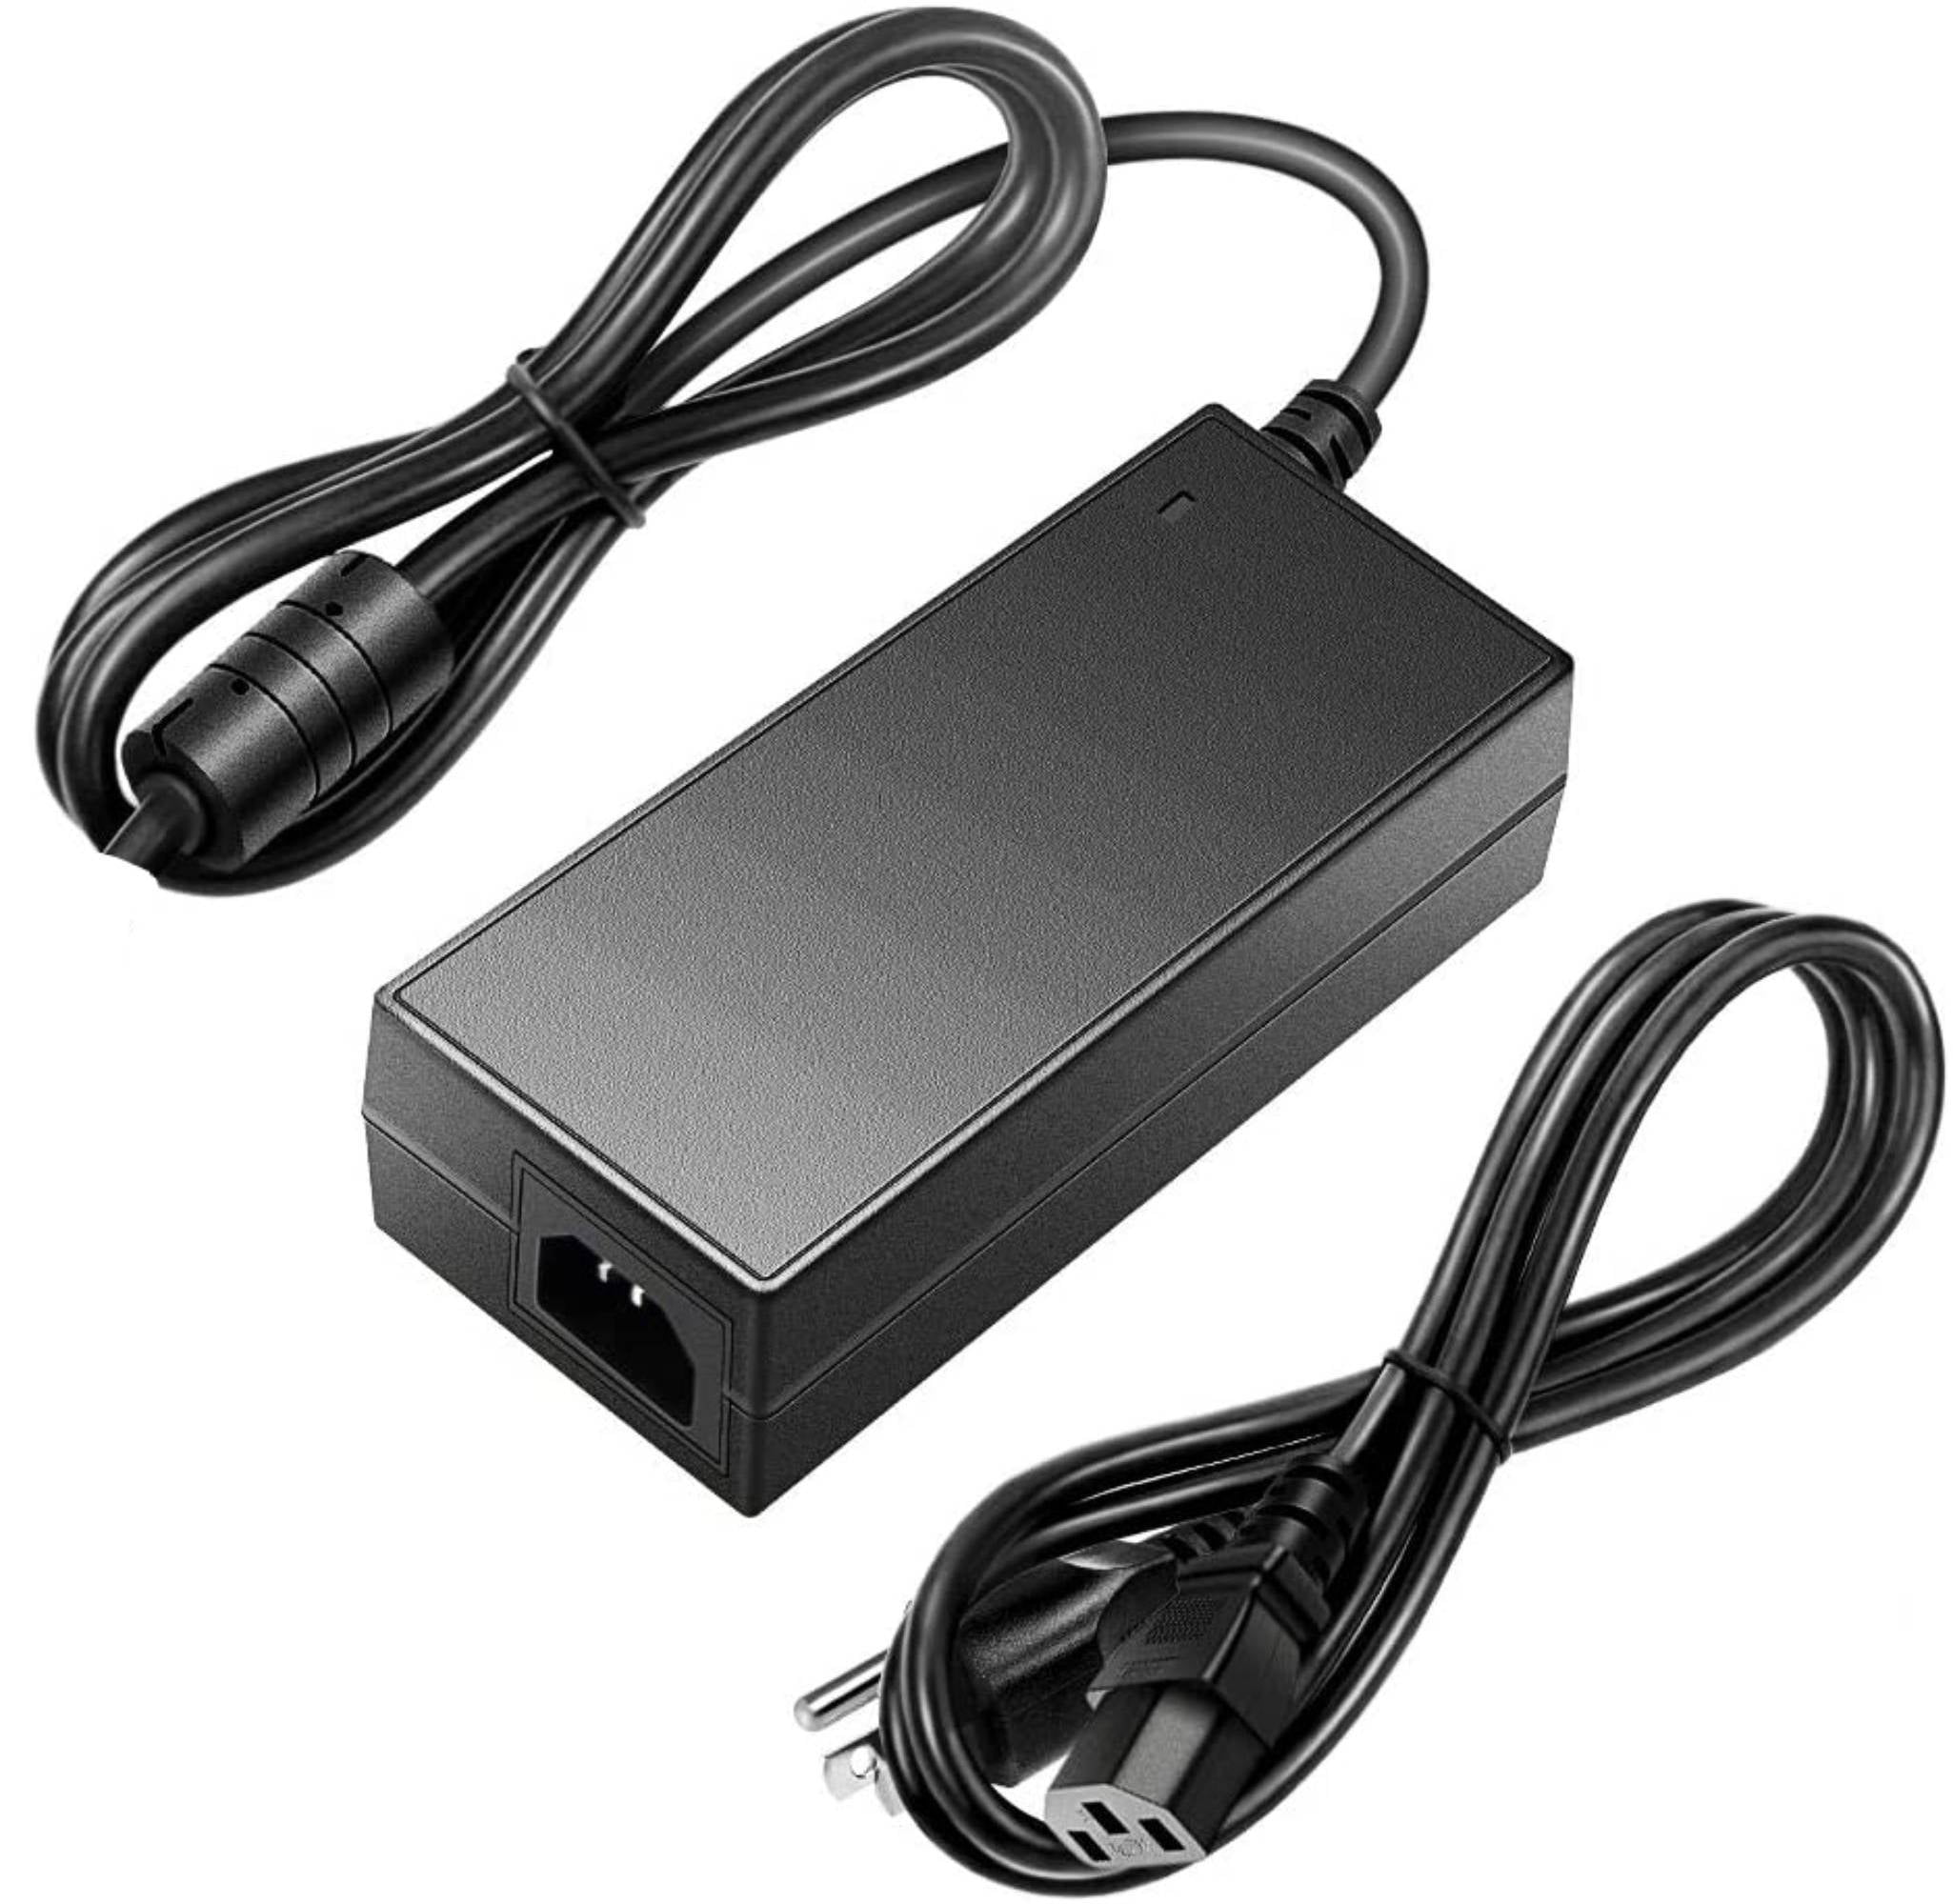 16V AC DC Adapter For Fujitsu FI-4120C2 Sheetfed Scanner Charger Power Supply 